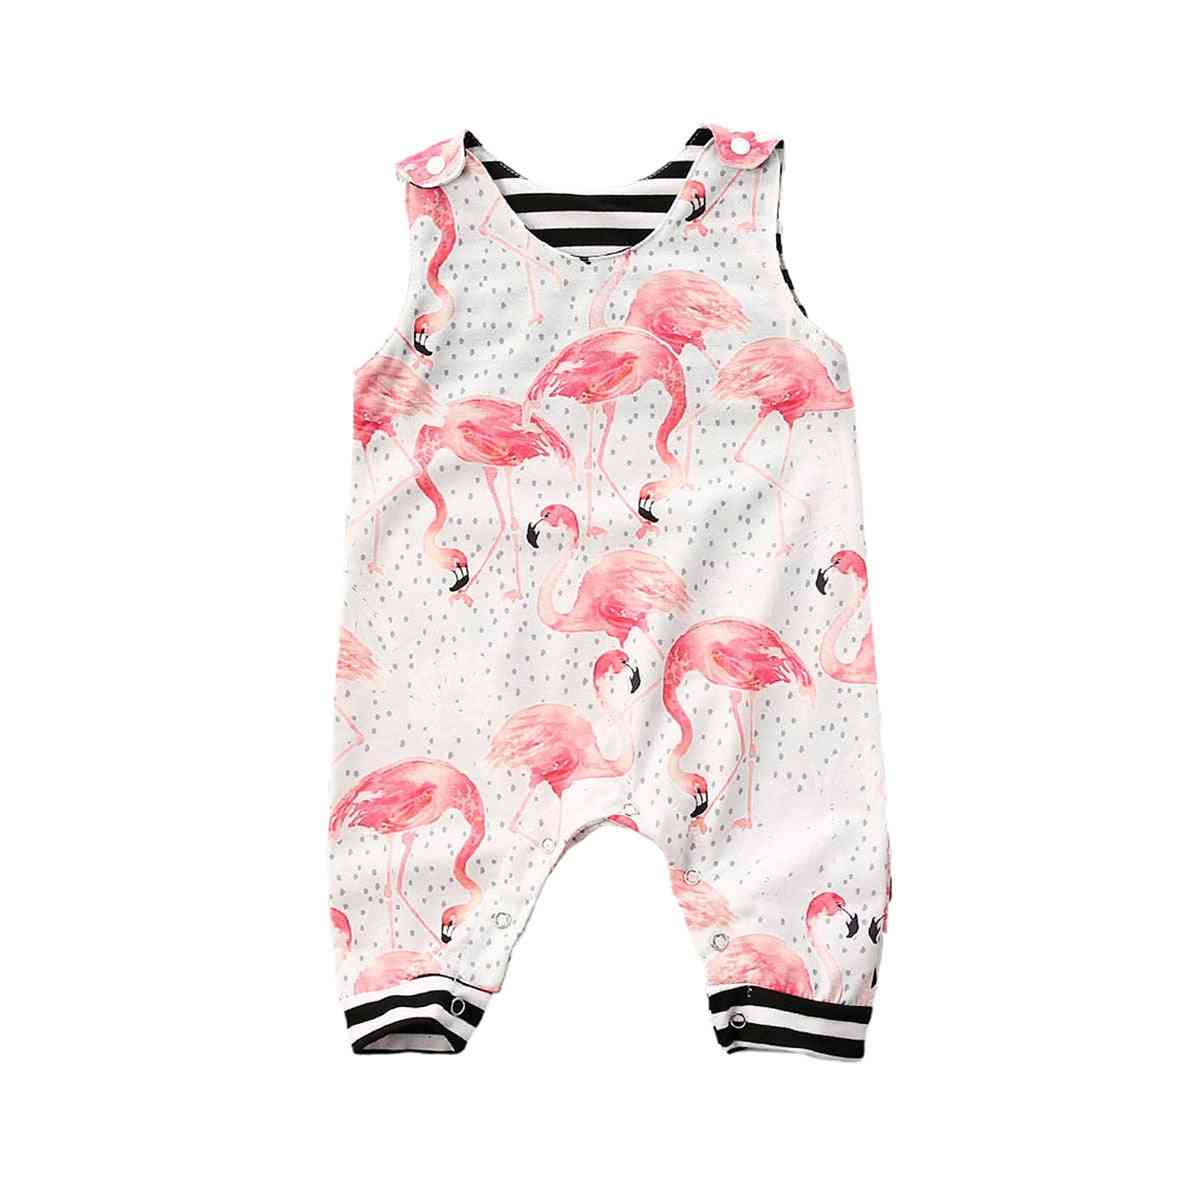 Baby Clothing Newborn Whale Romper- Sleeveless Jumpsuit, Outfit Clothes